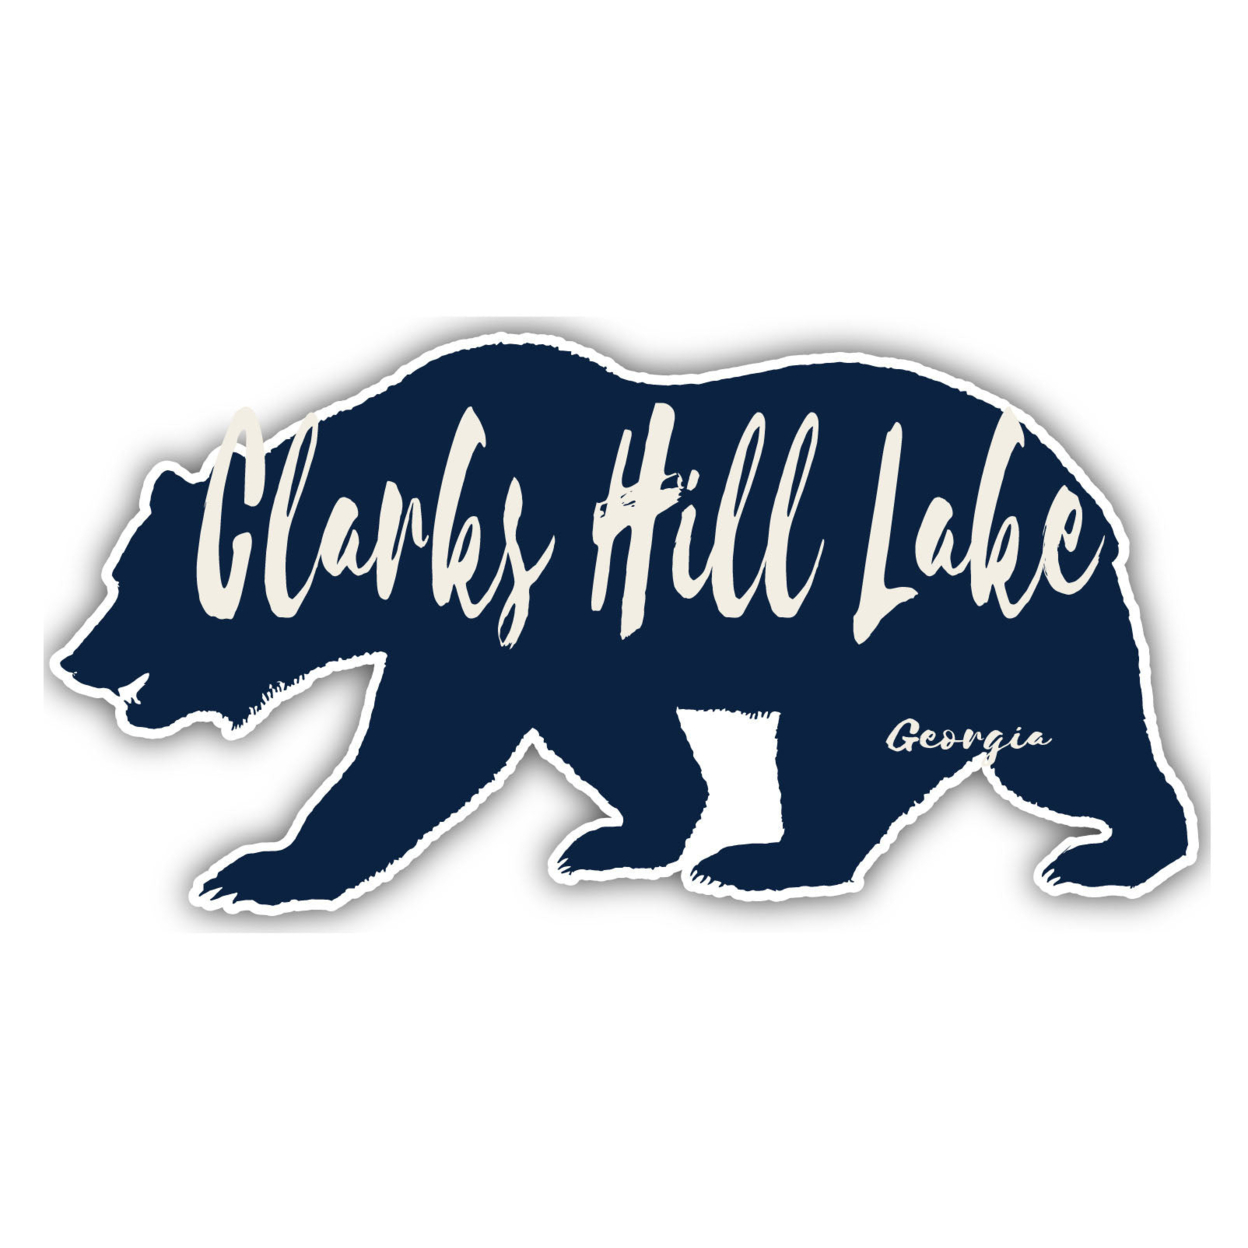 Clarks Hill Lake Georgia Souvenir Decorative Stickers (Choose Theme And Size) - 4-Pack, 4-Inch, Tent